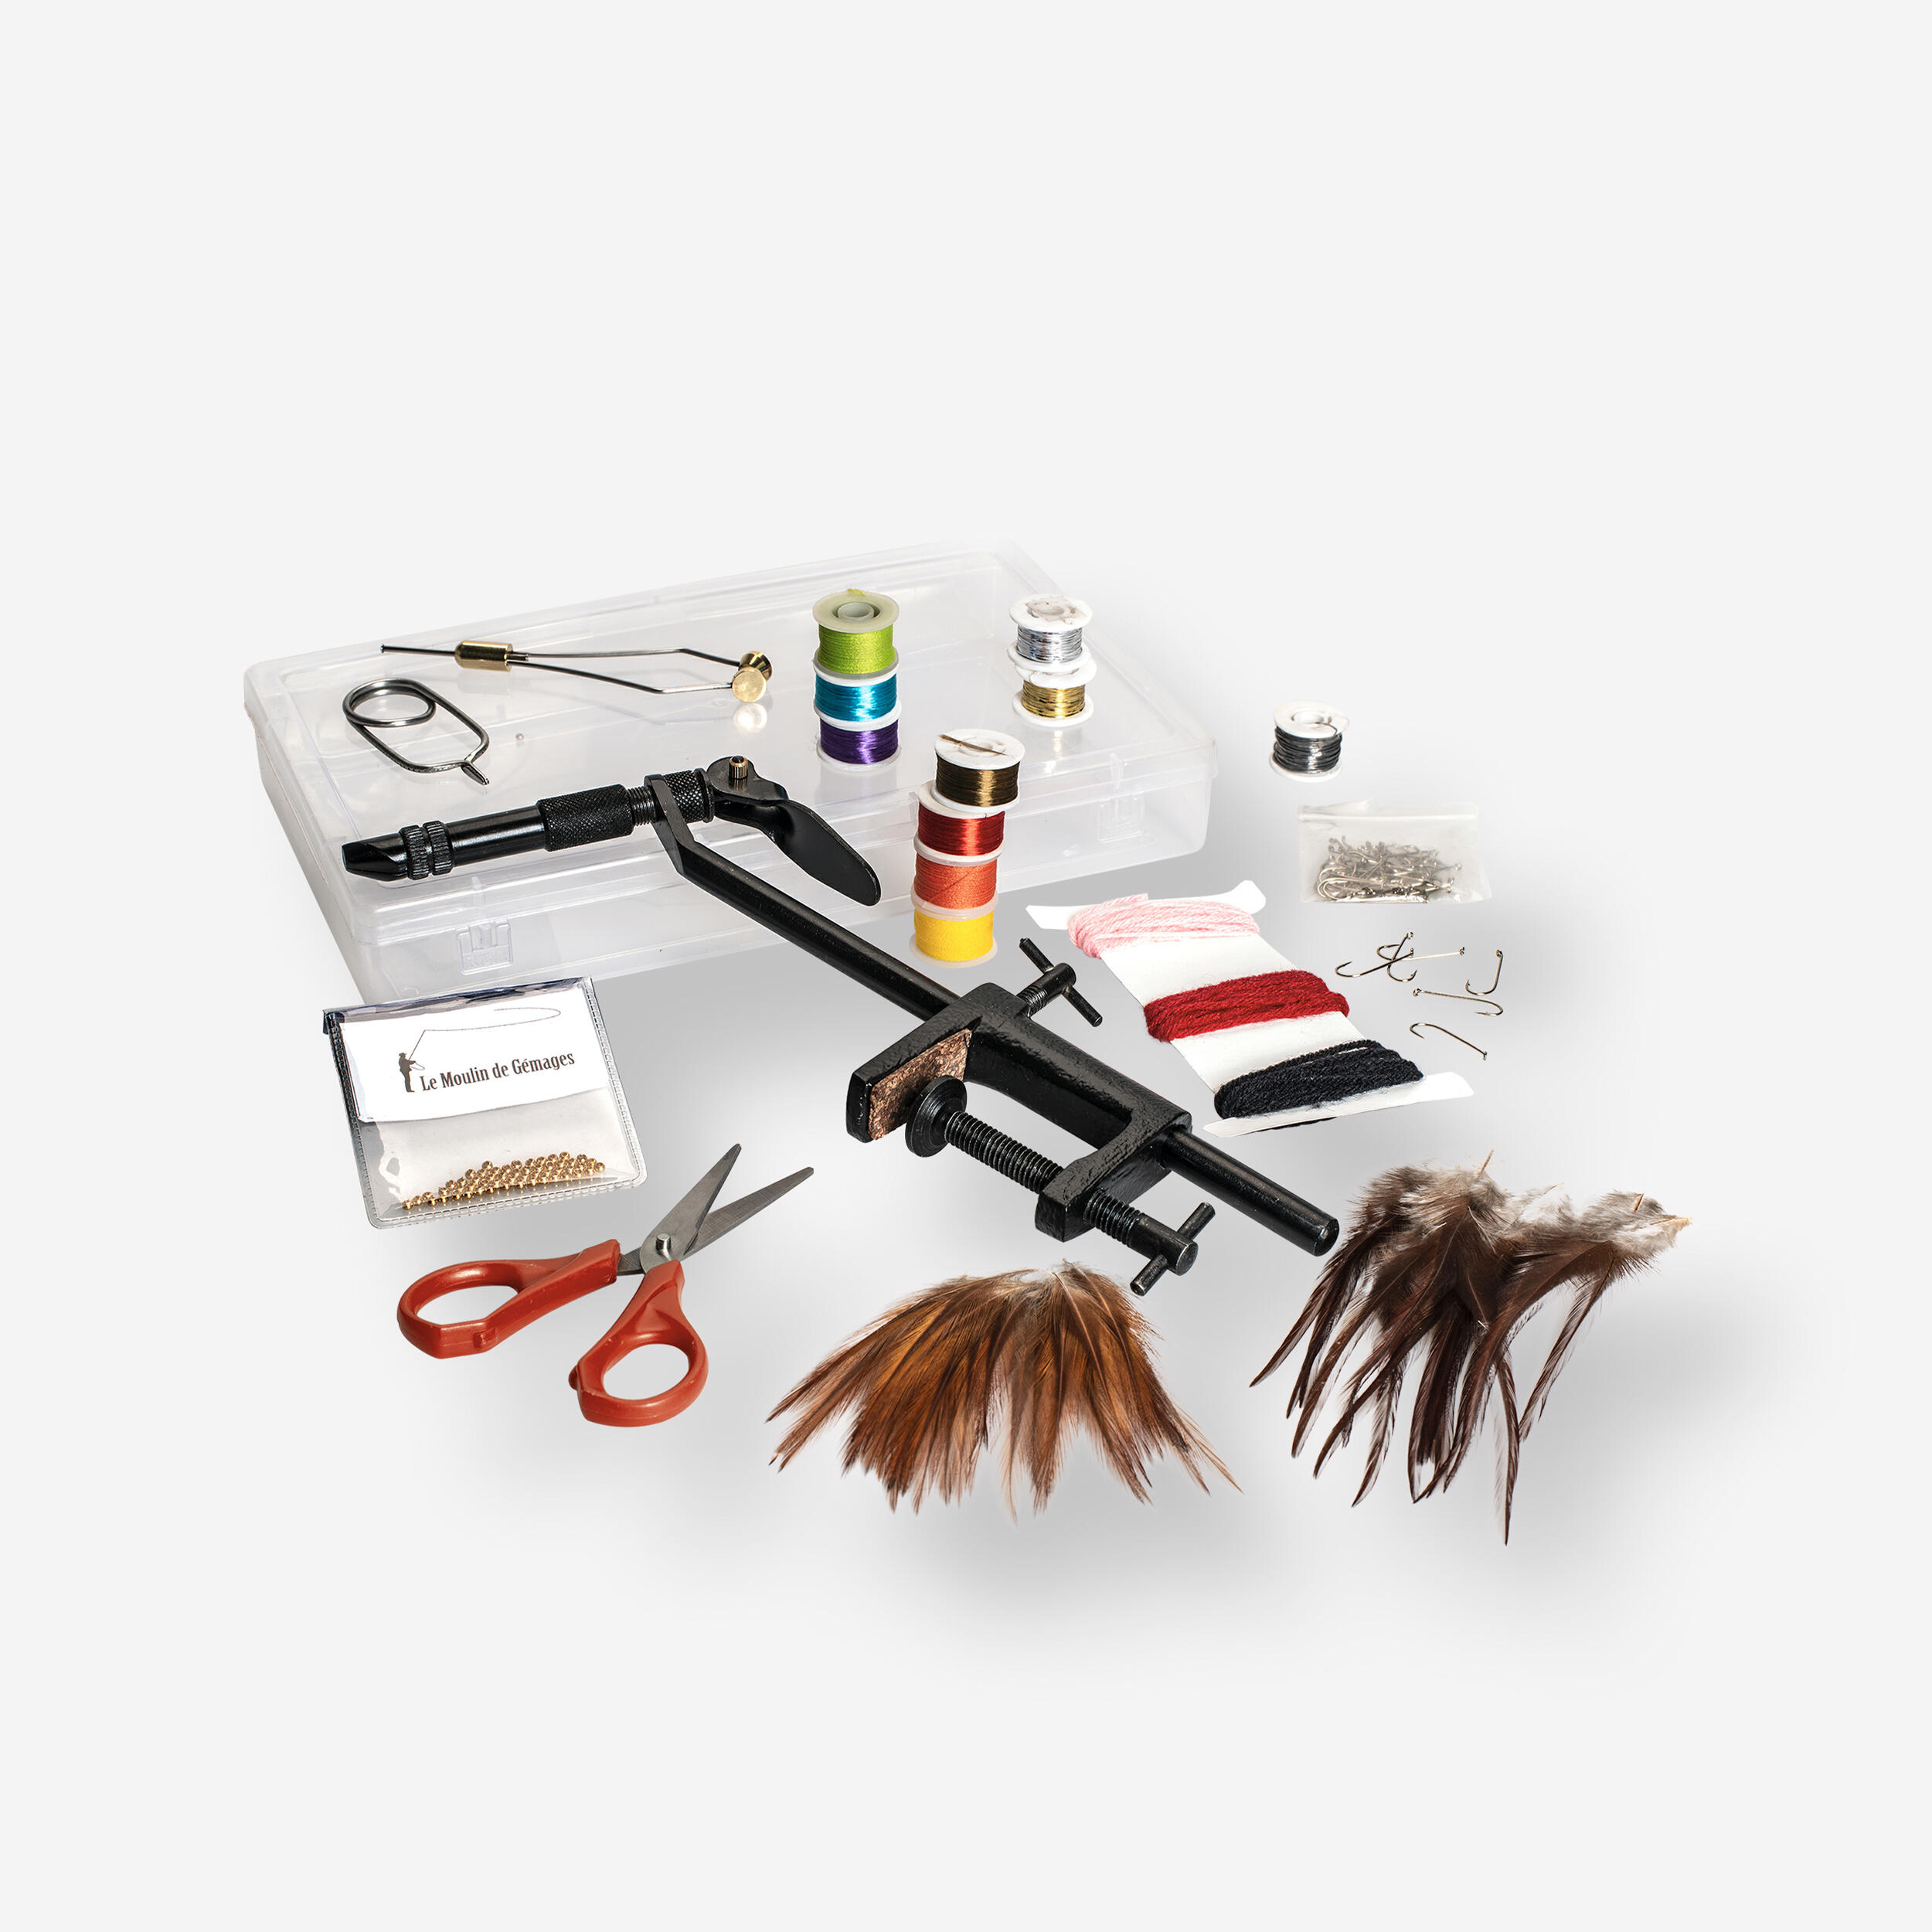 LE MOULIN DE GEMAGES FLY RIGGING KIT FOR BEGINNERS